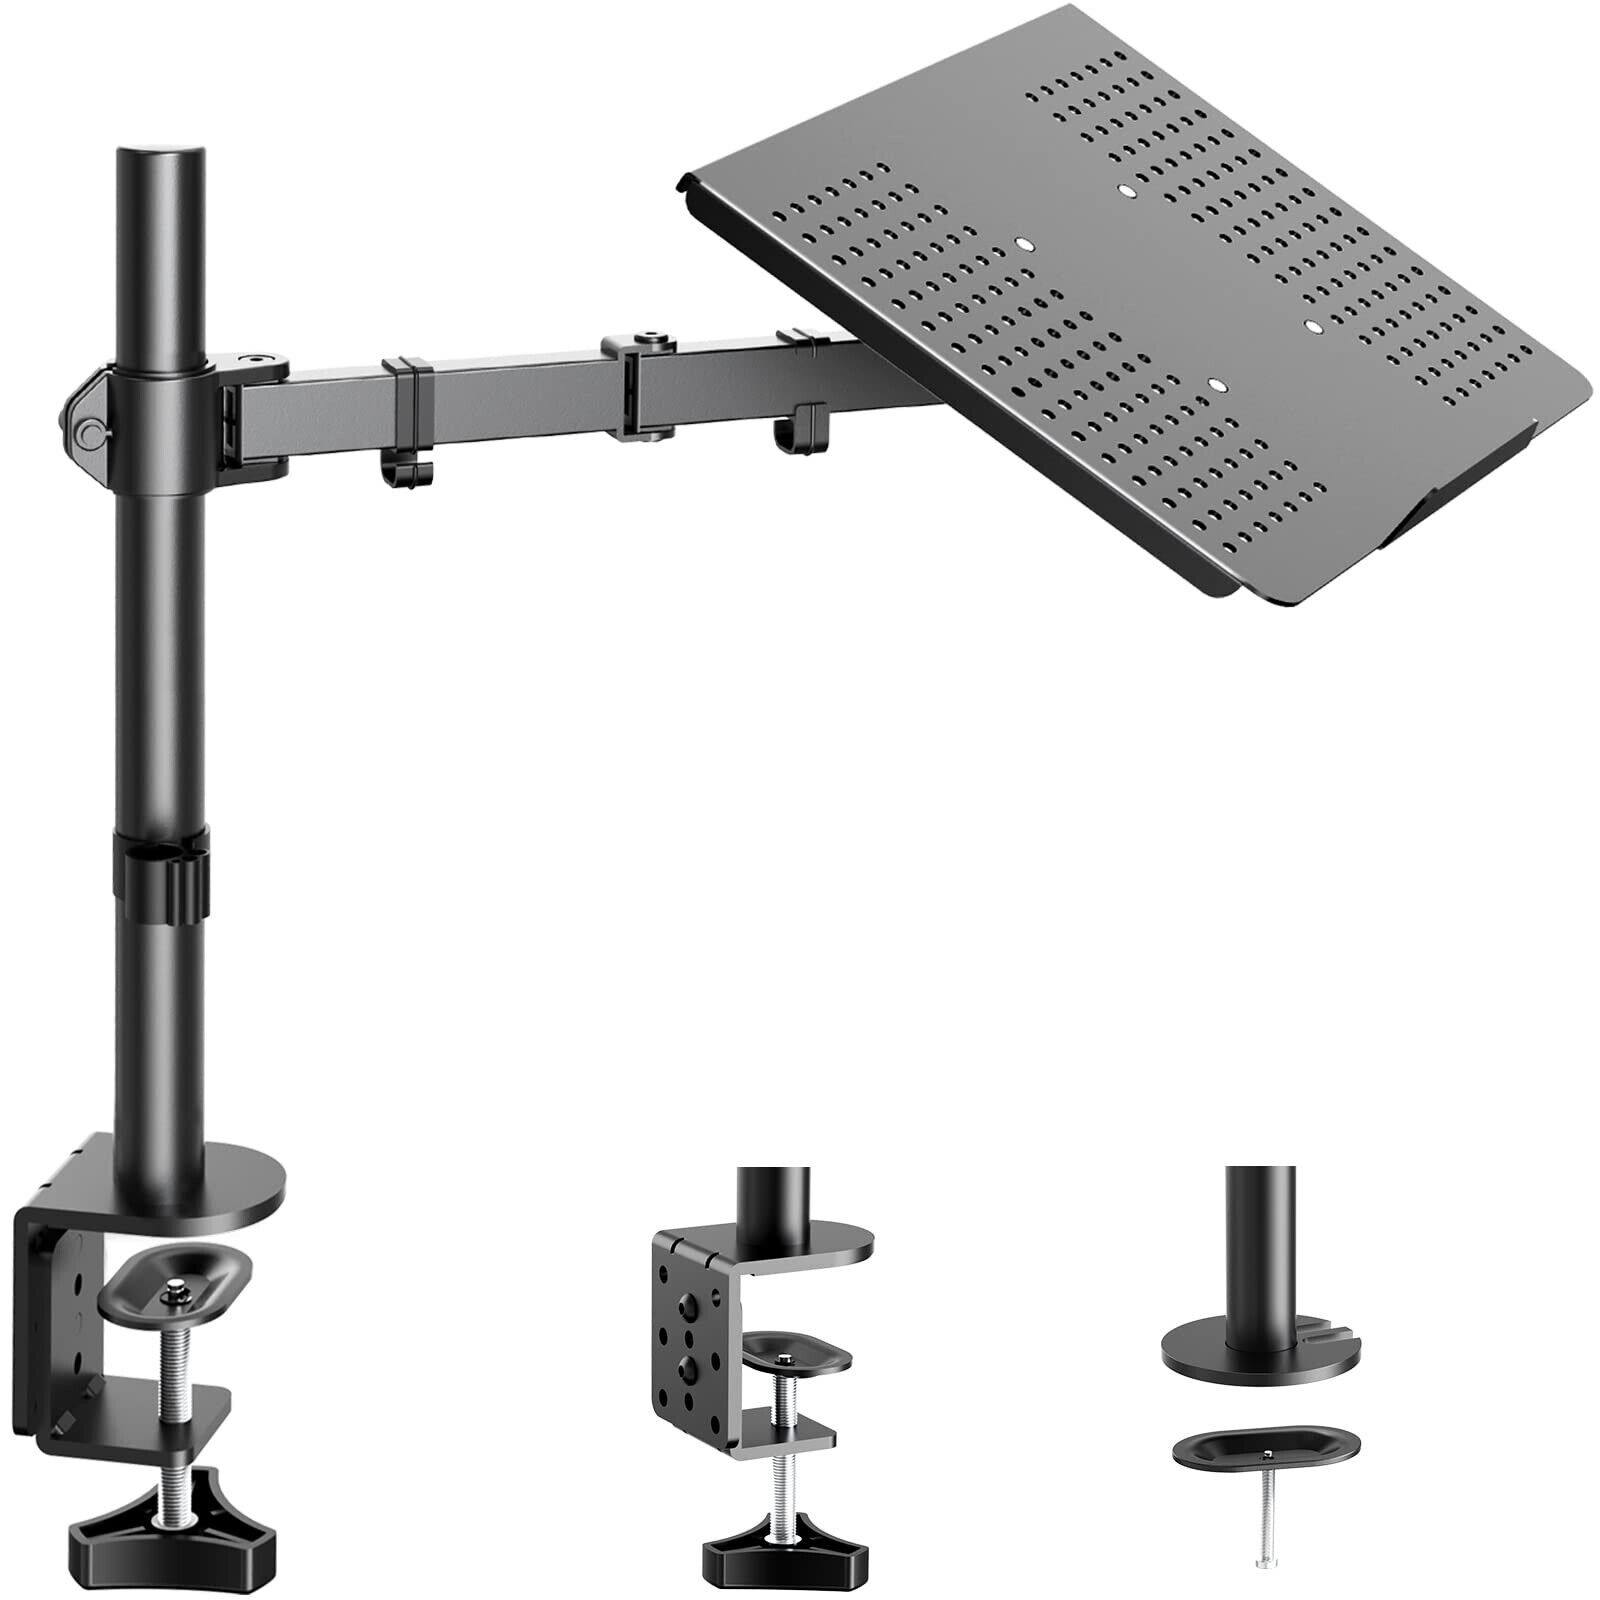 HUANUO Laptop Desk Mount with Tray, Single Laptop Mount for Notebook up to 17...